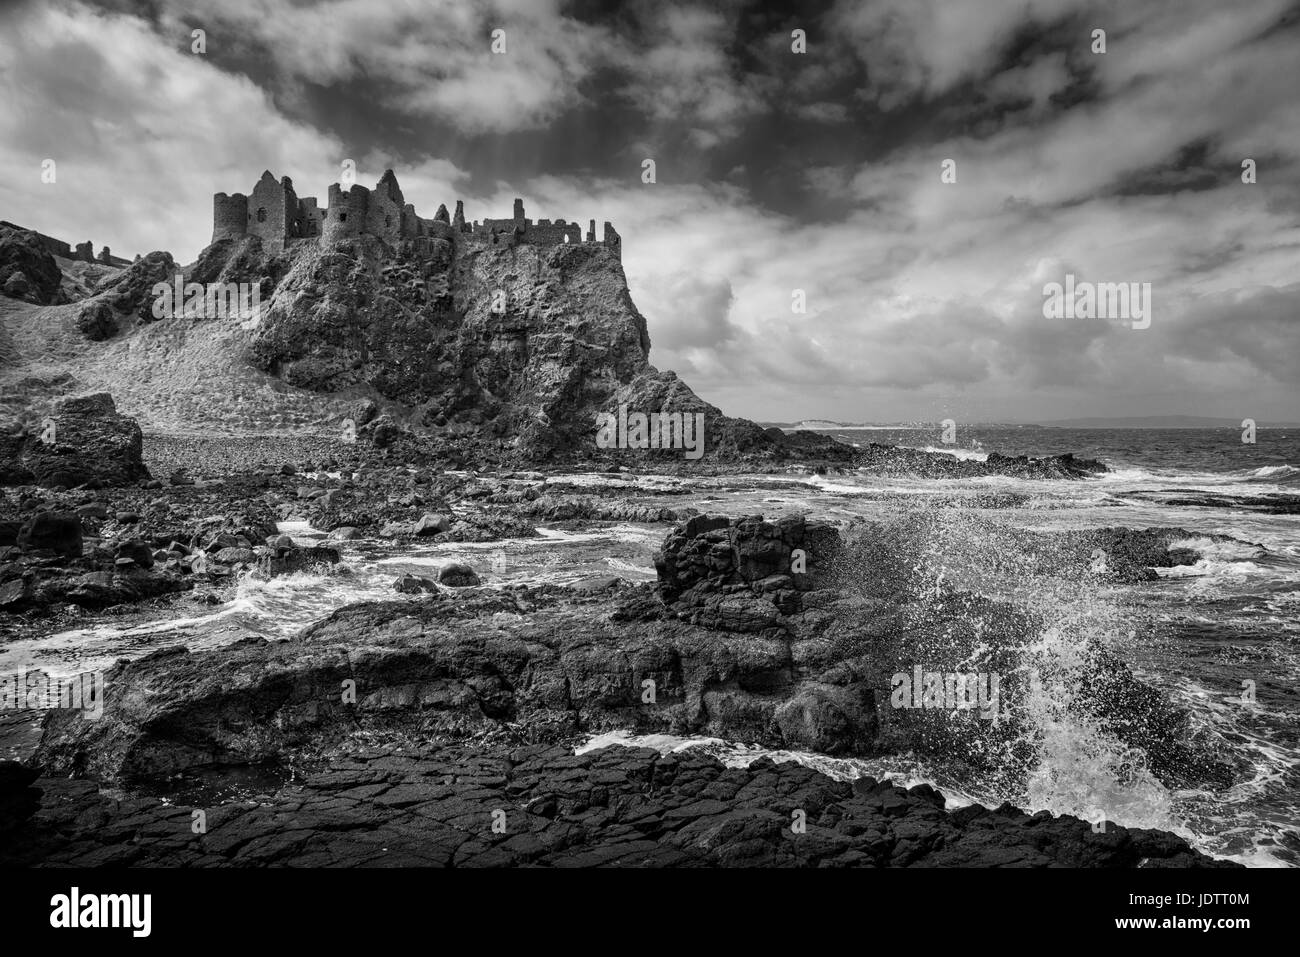 Dunluce Castle in a dramatic clifftop setting on the Causeway Coast of County Antrim Northern Ireland Stock Photo